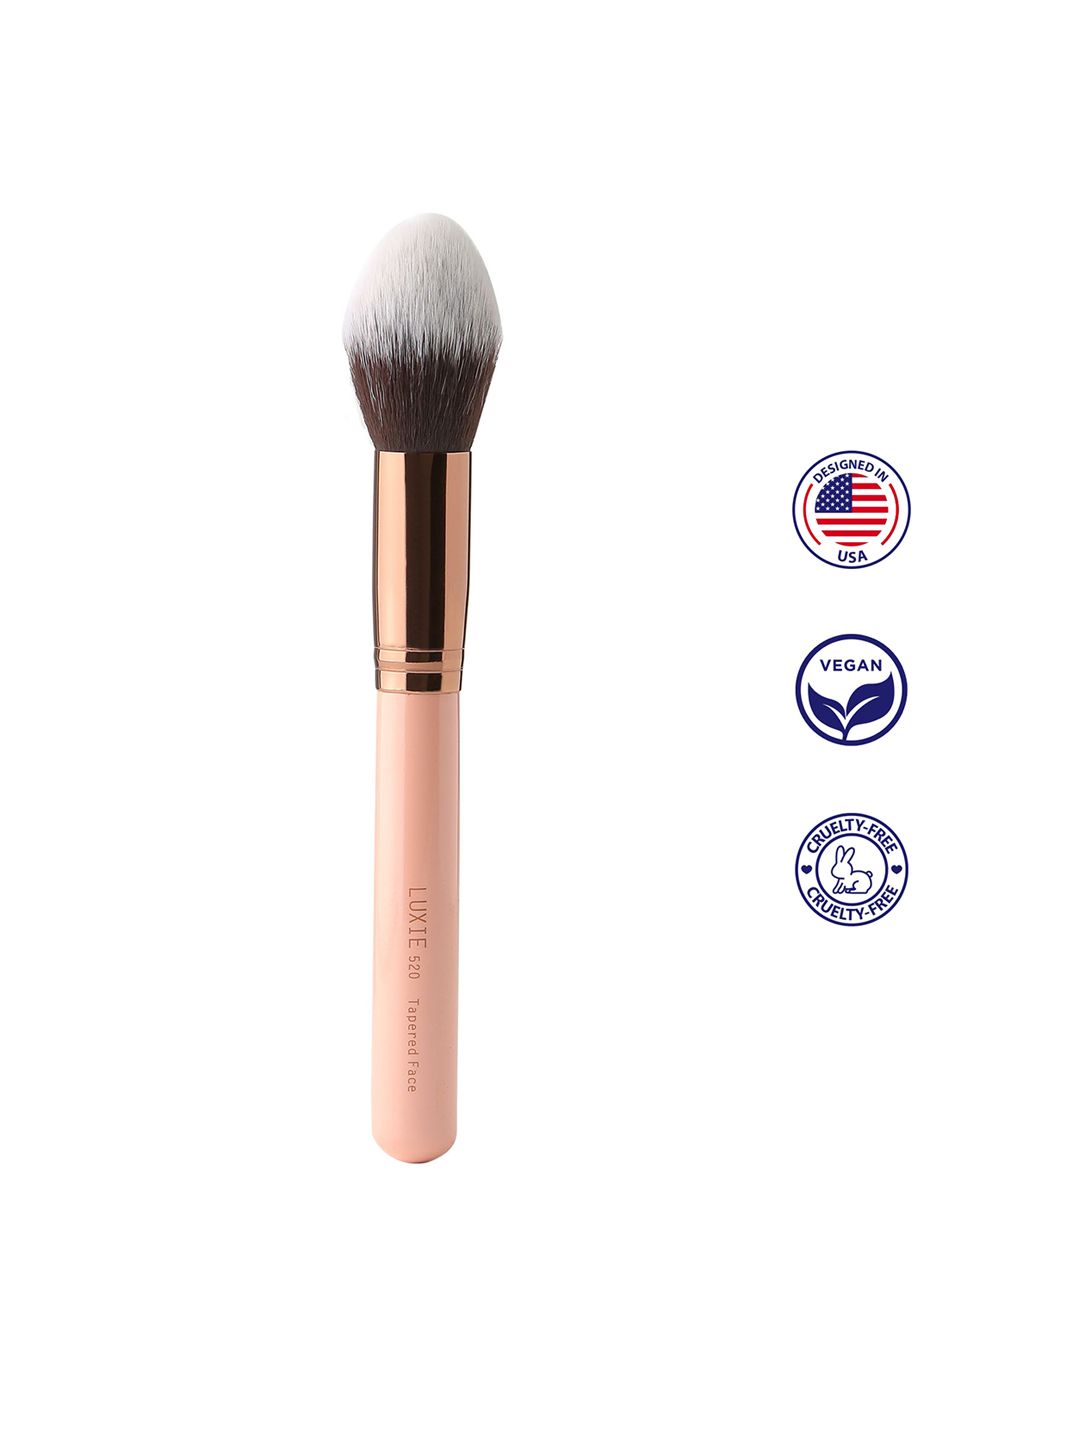 LUXIE Rose Gold Tapered Face Brush - 520 Price in India